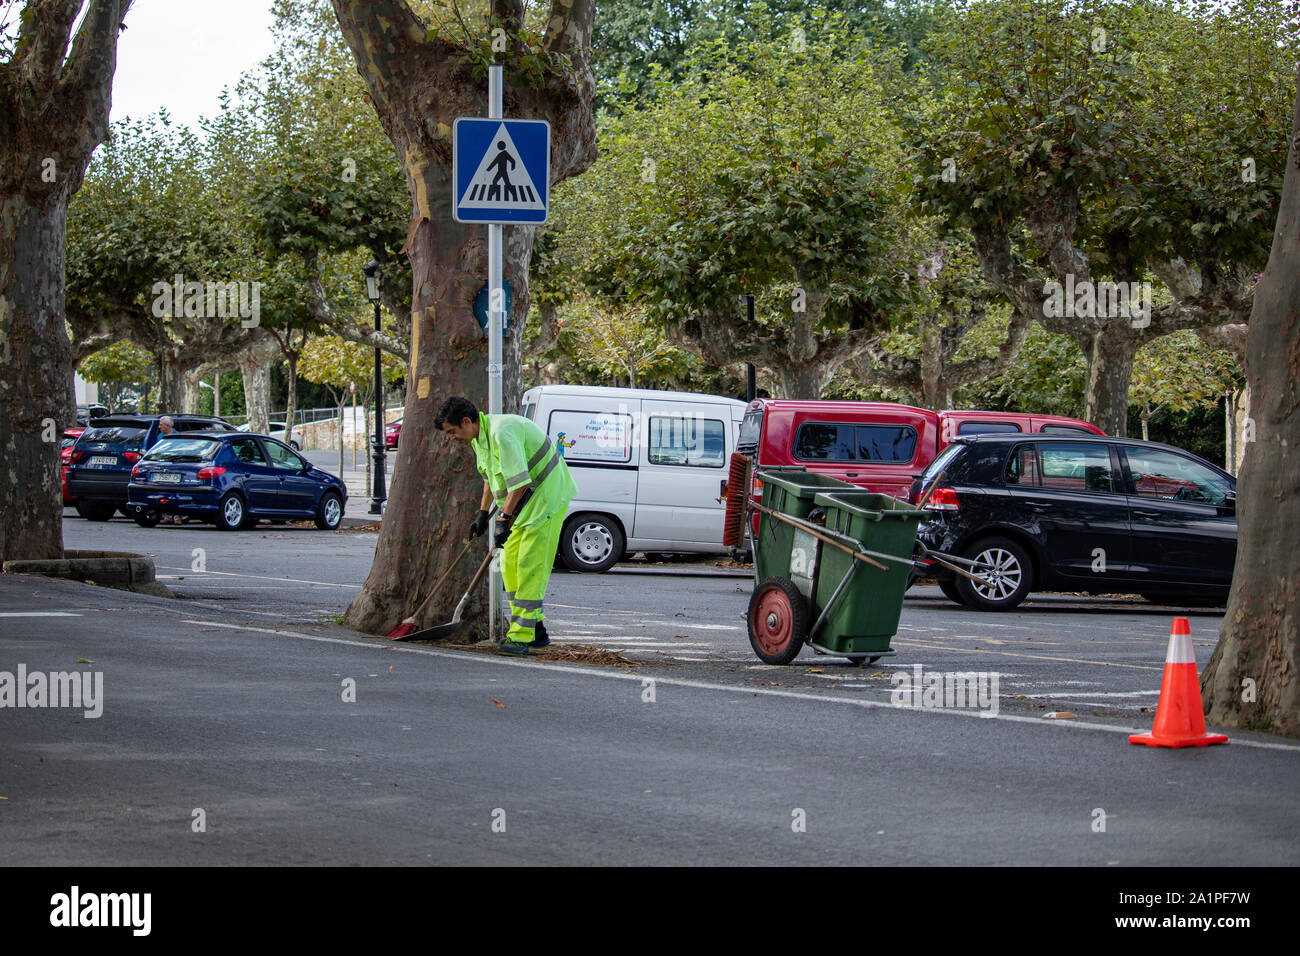 Cambre / Spain - September 24 2019: Street sweeper clearing leaves from the road in Cambre Spain Stock Photo